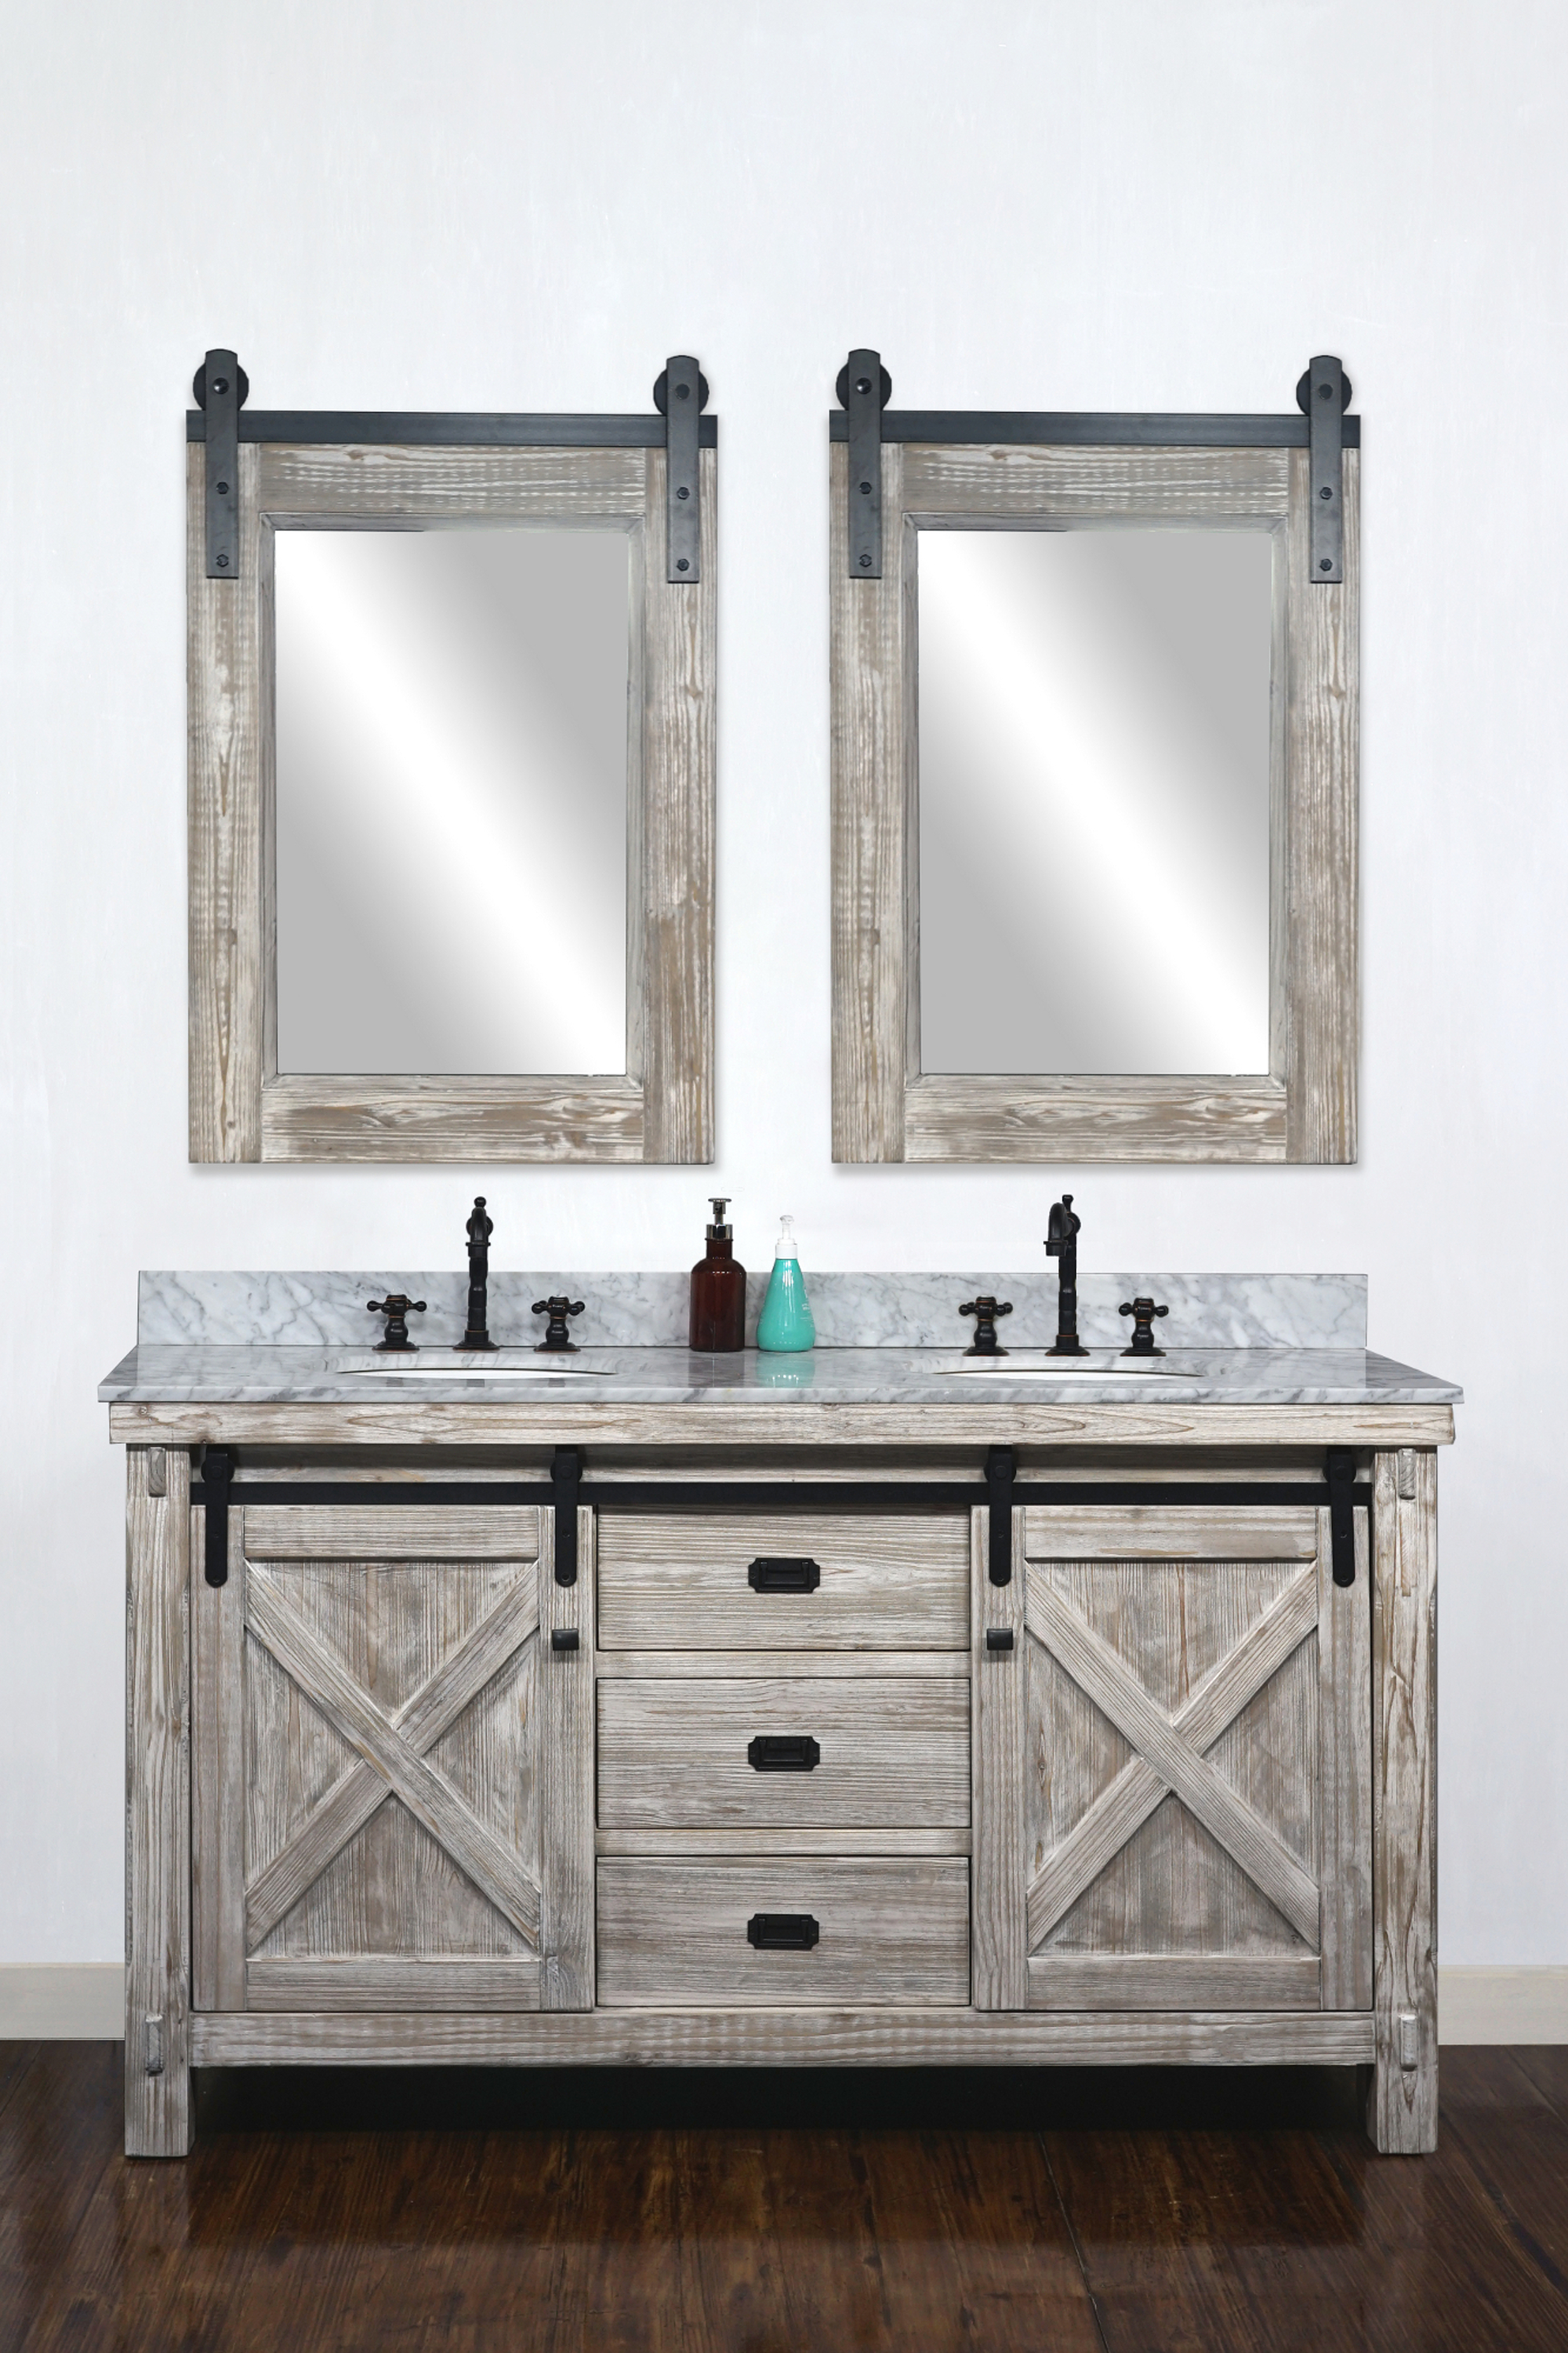 60" Rustic Solid Fir Barn Door Style Double Sink Vanity in White Washed